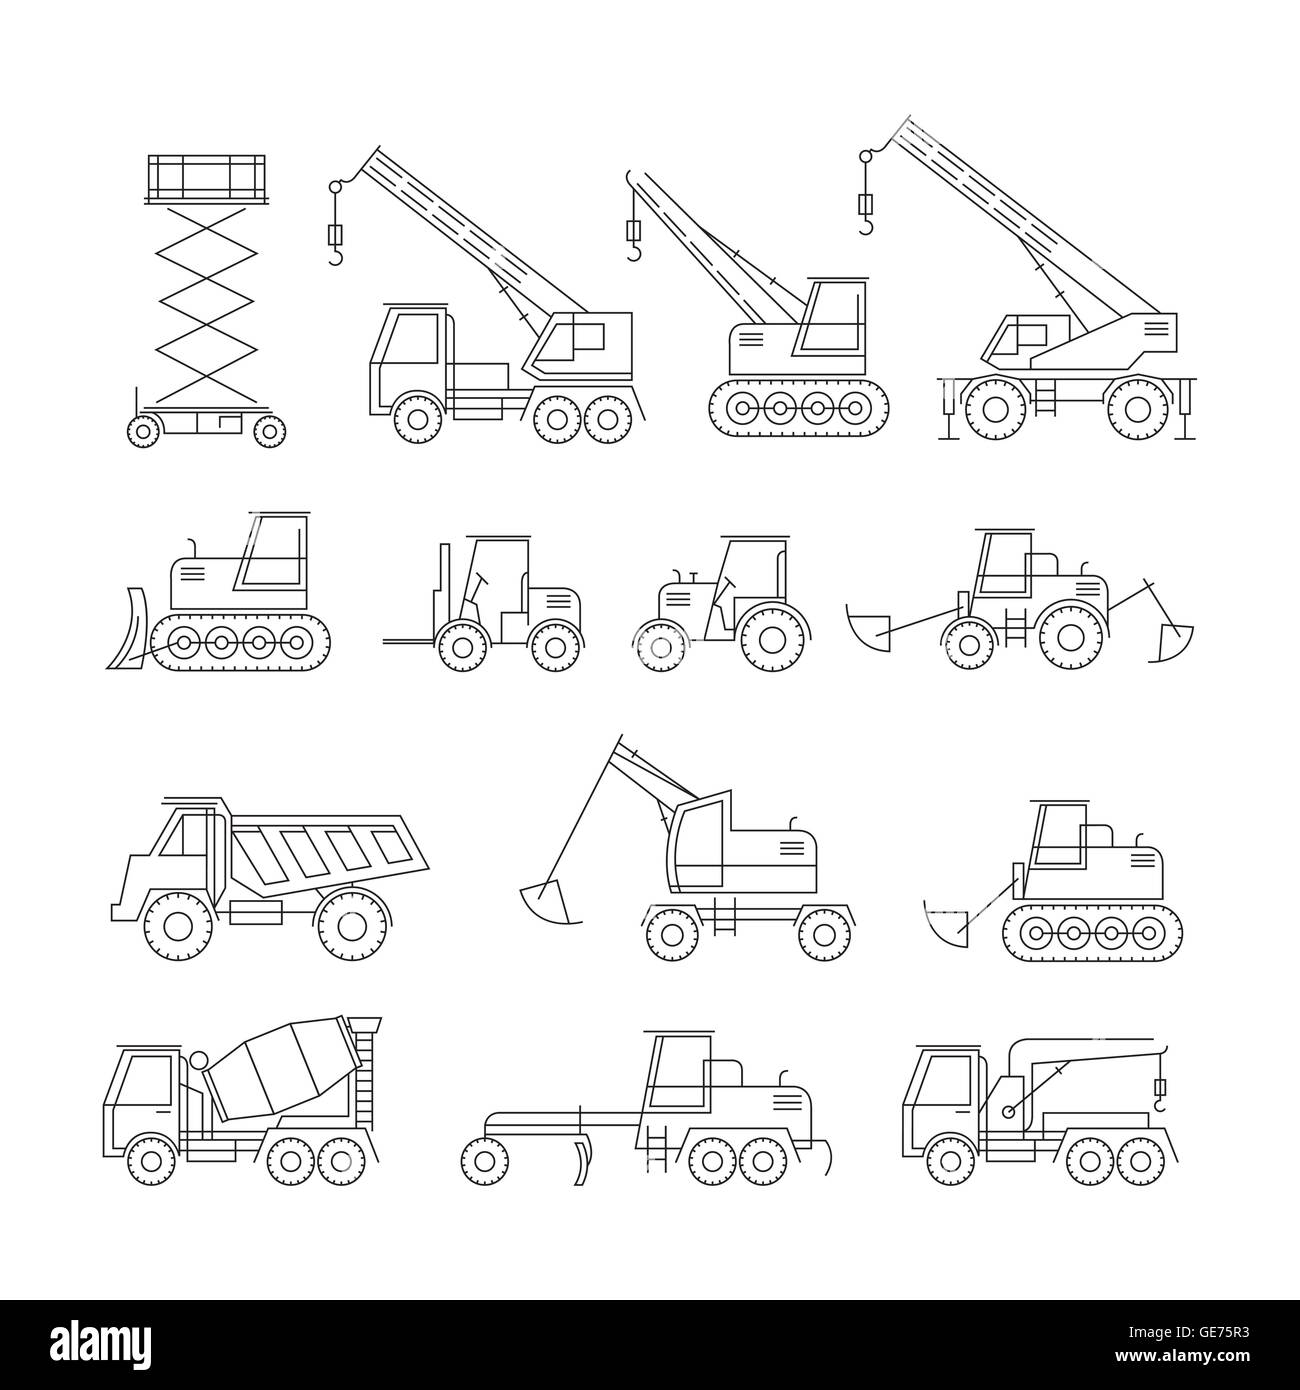 Construction Vehicles Objects Line Set, Side View, Heavy Equipment, Machinery, Engineering Stock Vector